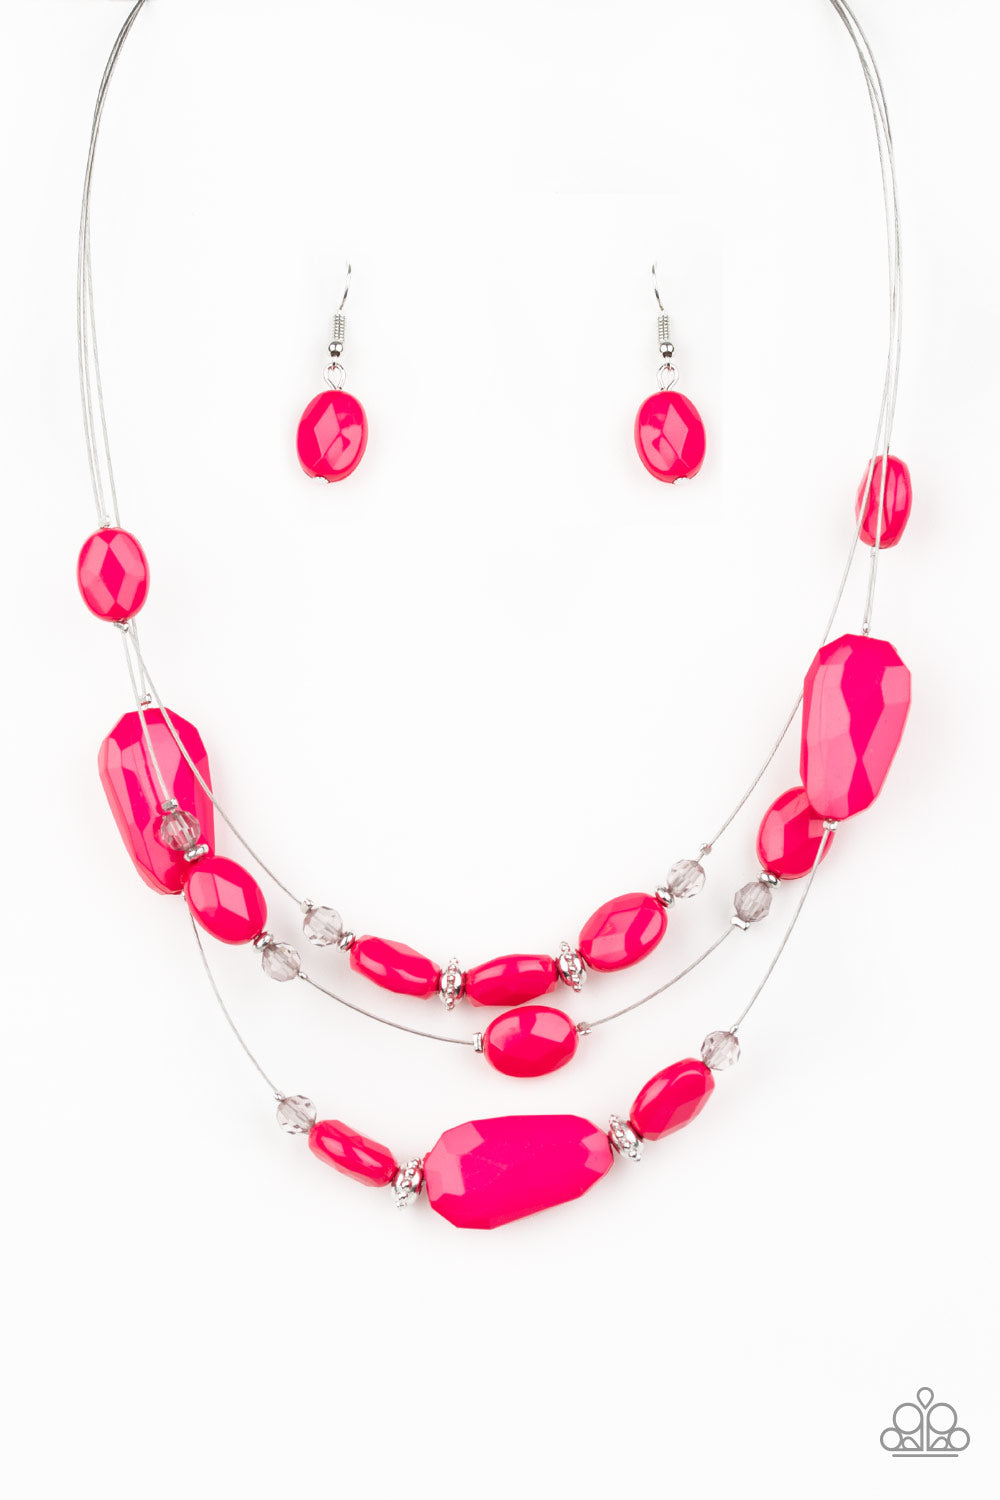 Paparazzi VINTAGE VAULT Radiant Reflections Pink Necklace & Earring